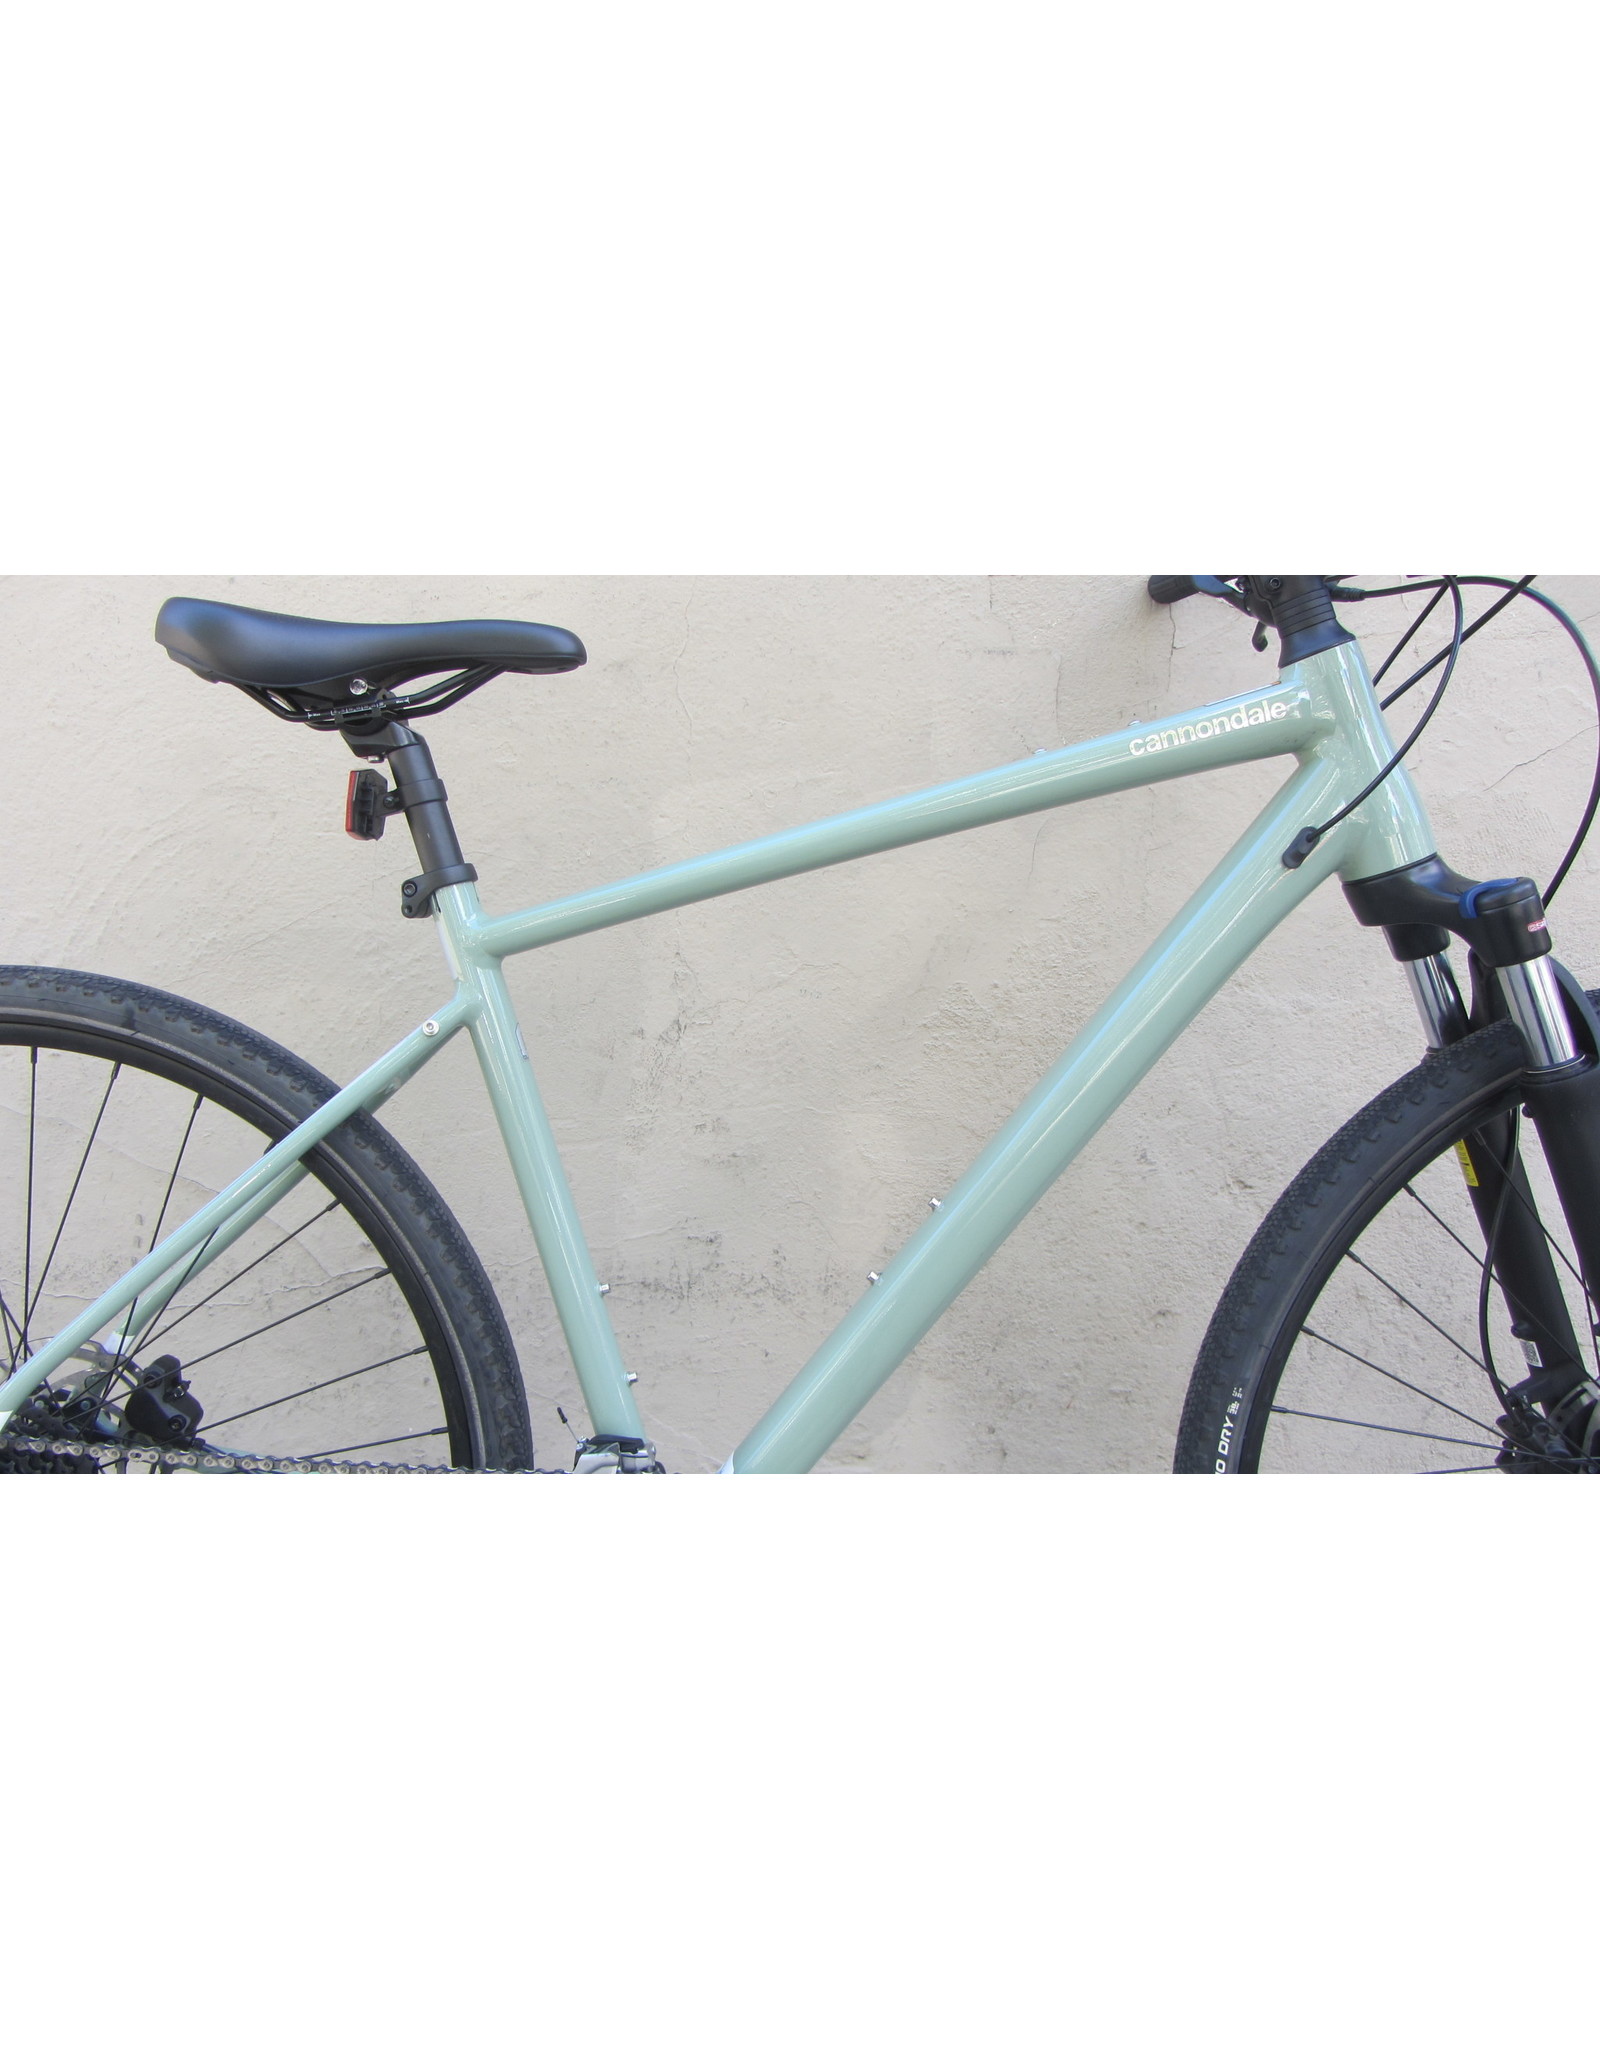 Cannondale Cannondale Quick CX 3, 20 Inches,  2021, Agave